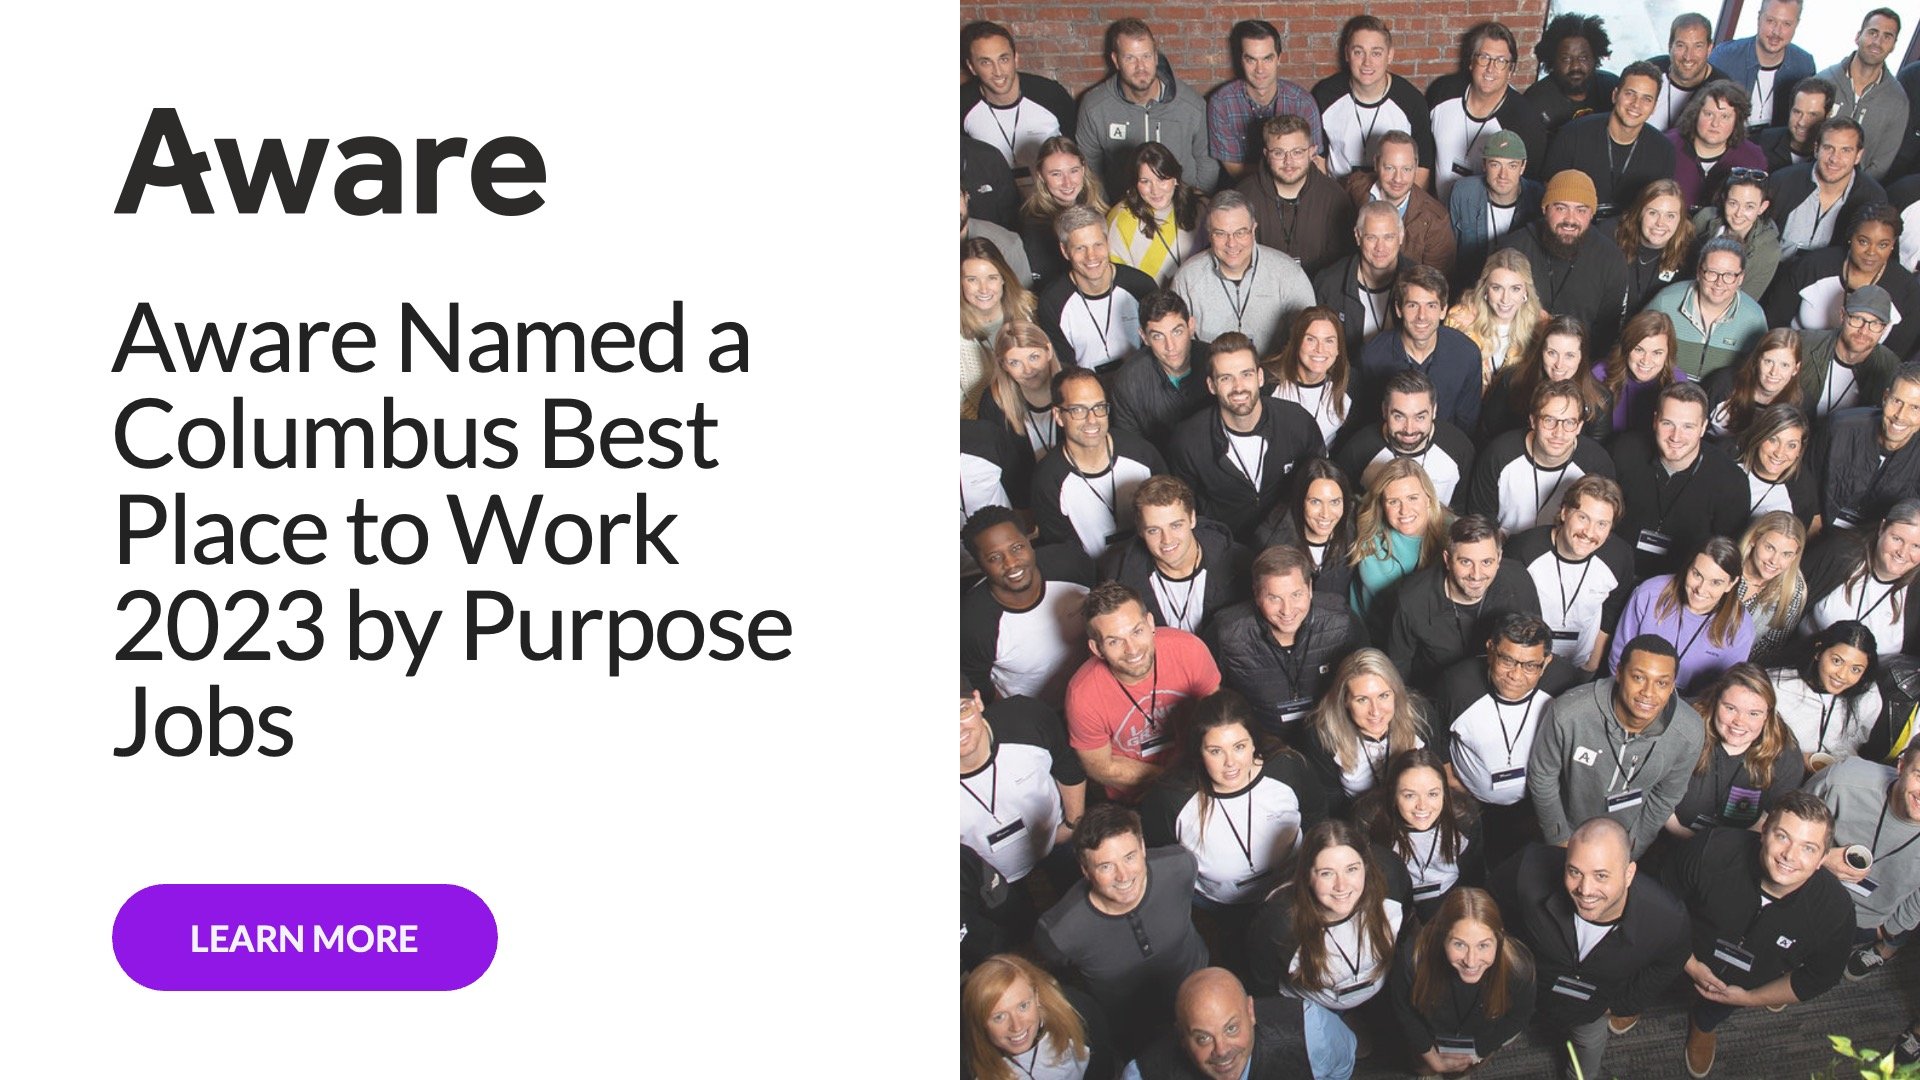 Aware Named a Columbus Best Place to Work 2023 by Purpose Jobs